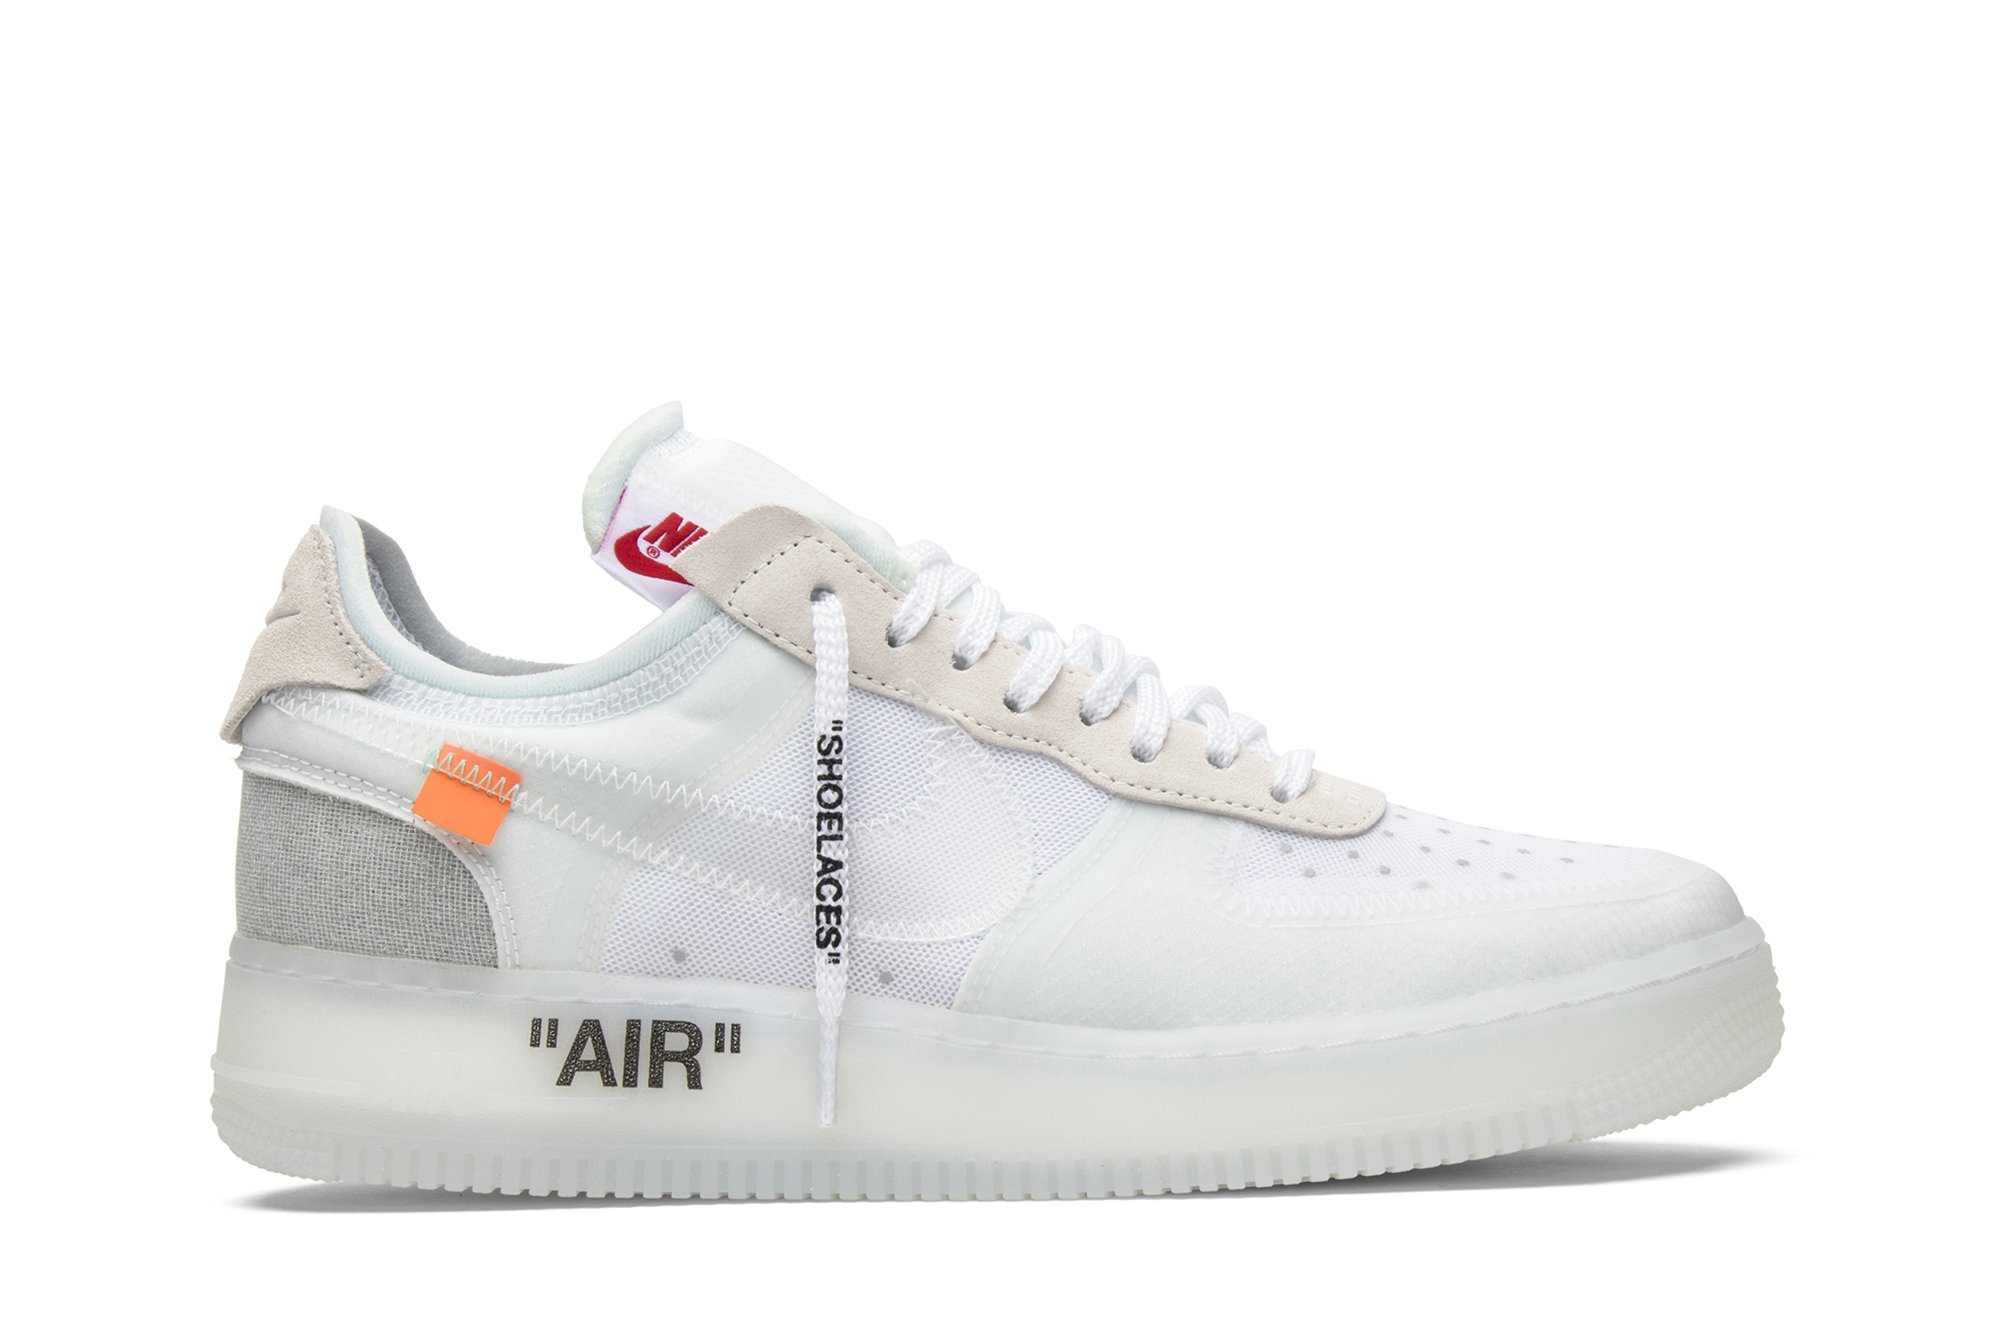 NIKE×off-white AIR FORCE 1 MID SP スニーカー 靴 レディース 贈り物